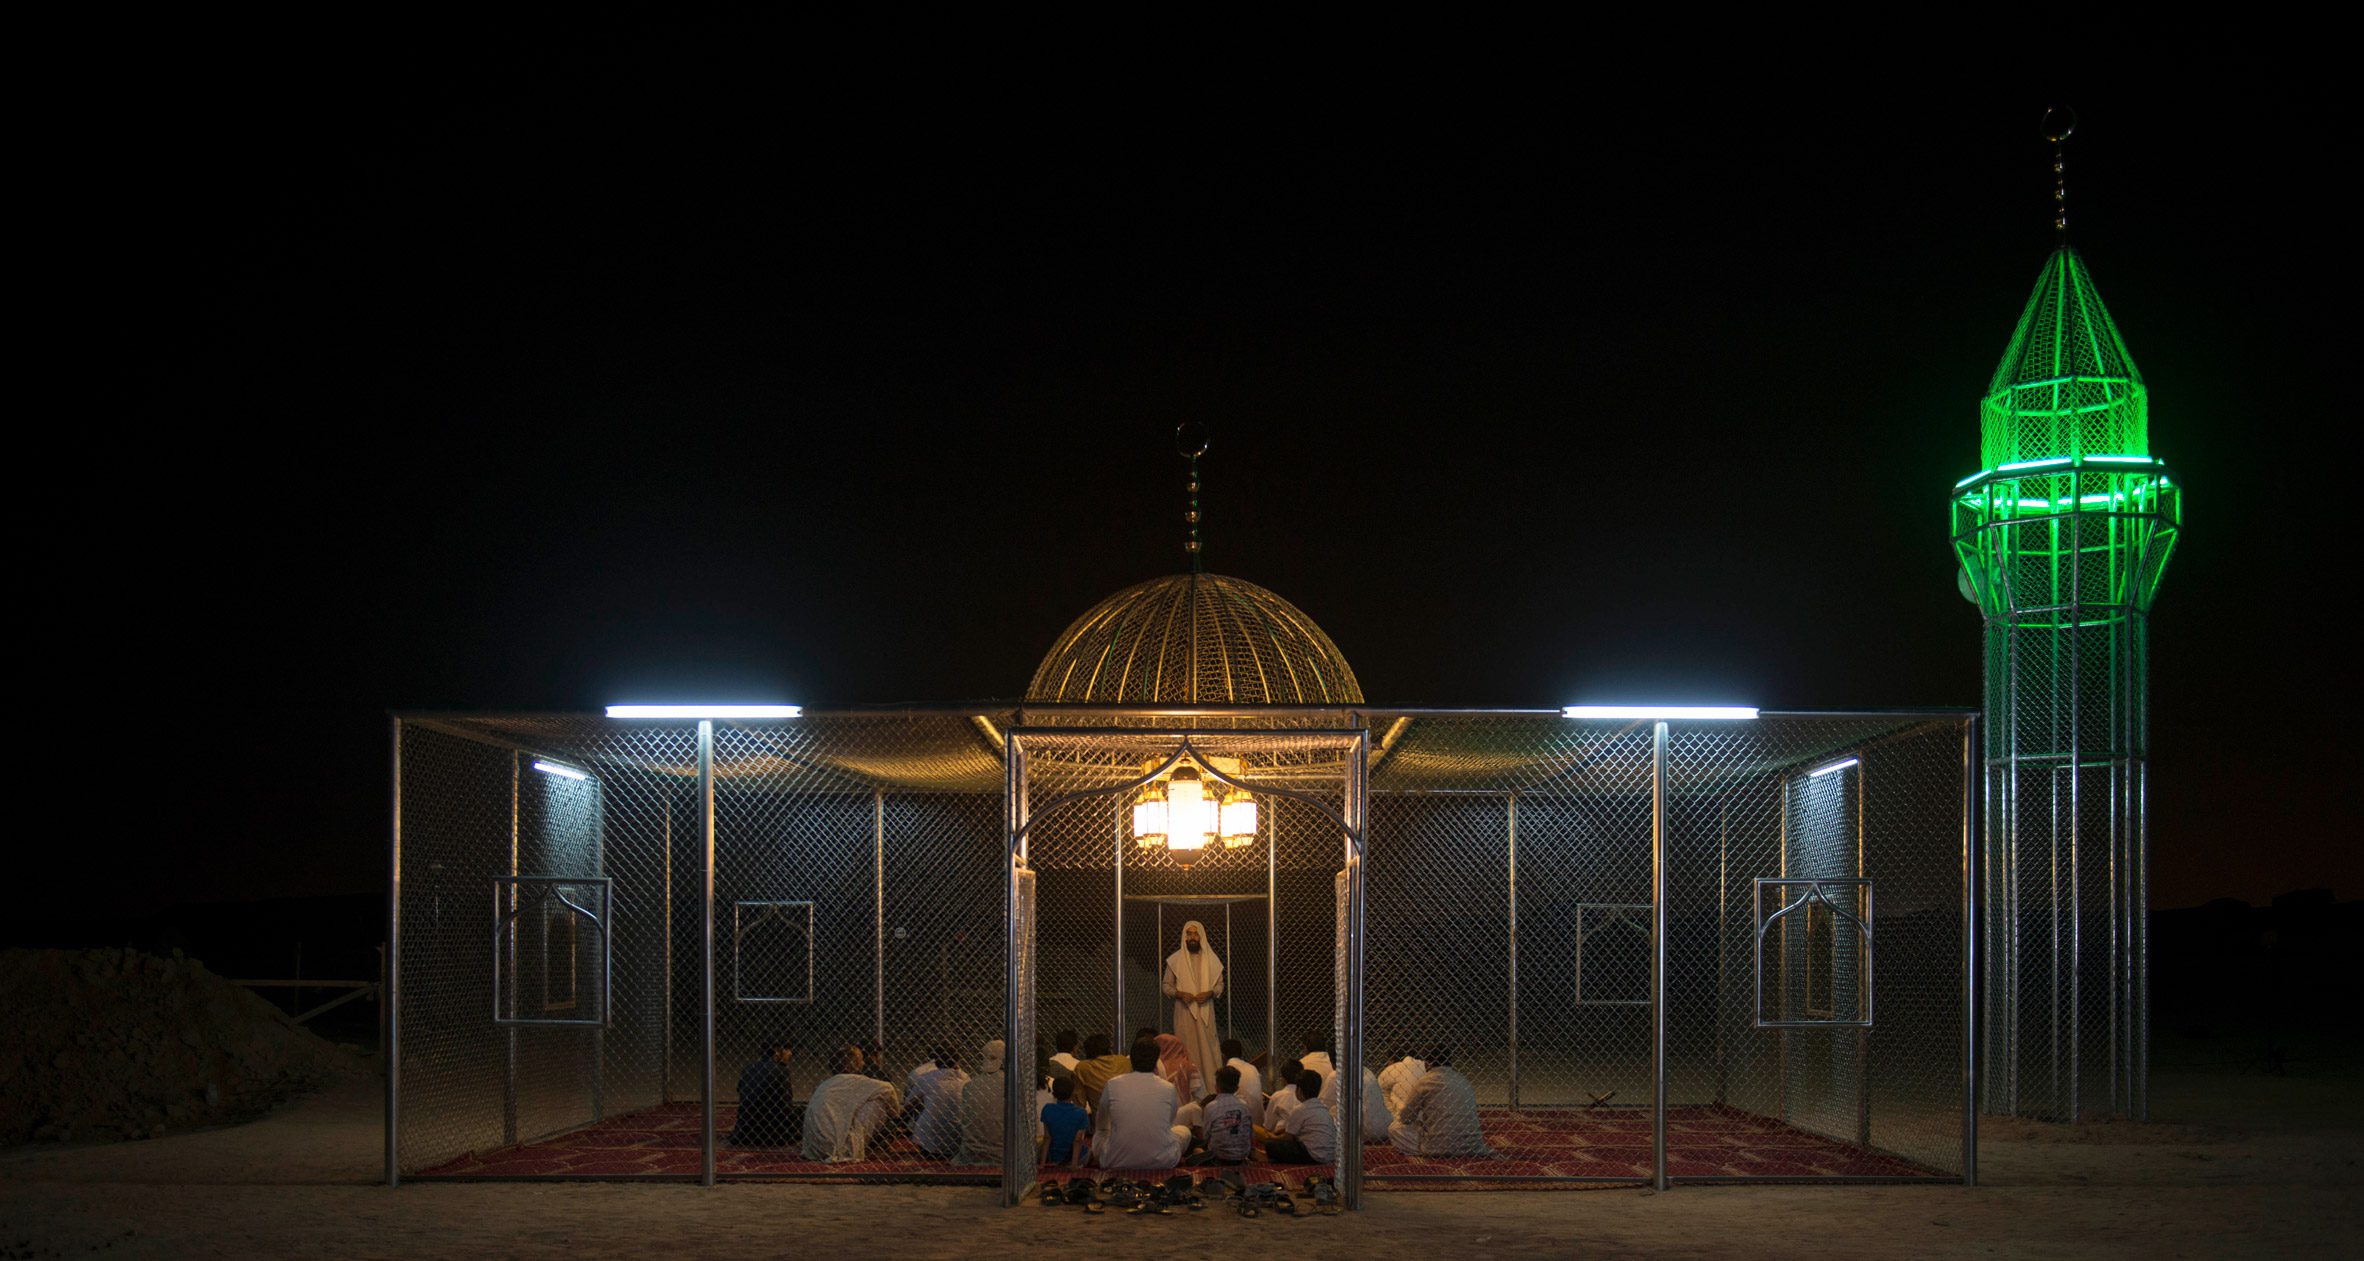 People gather inside the steel mosque at night